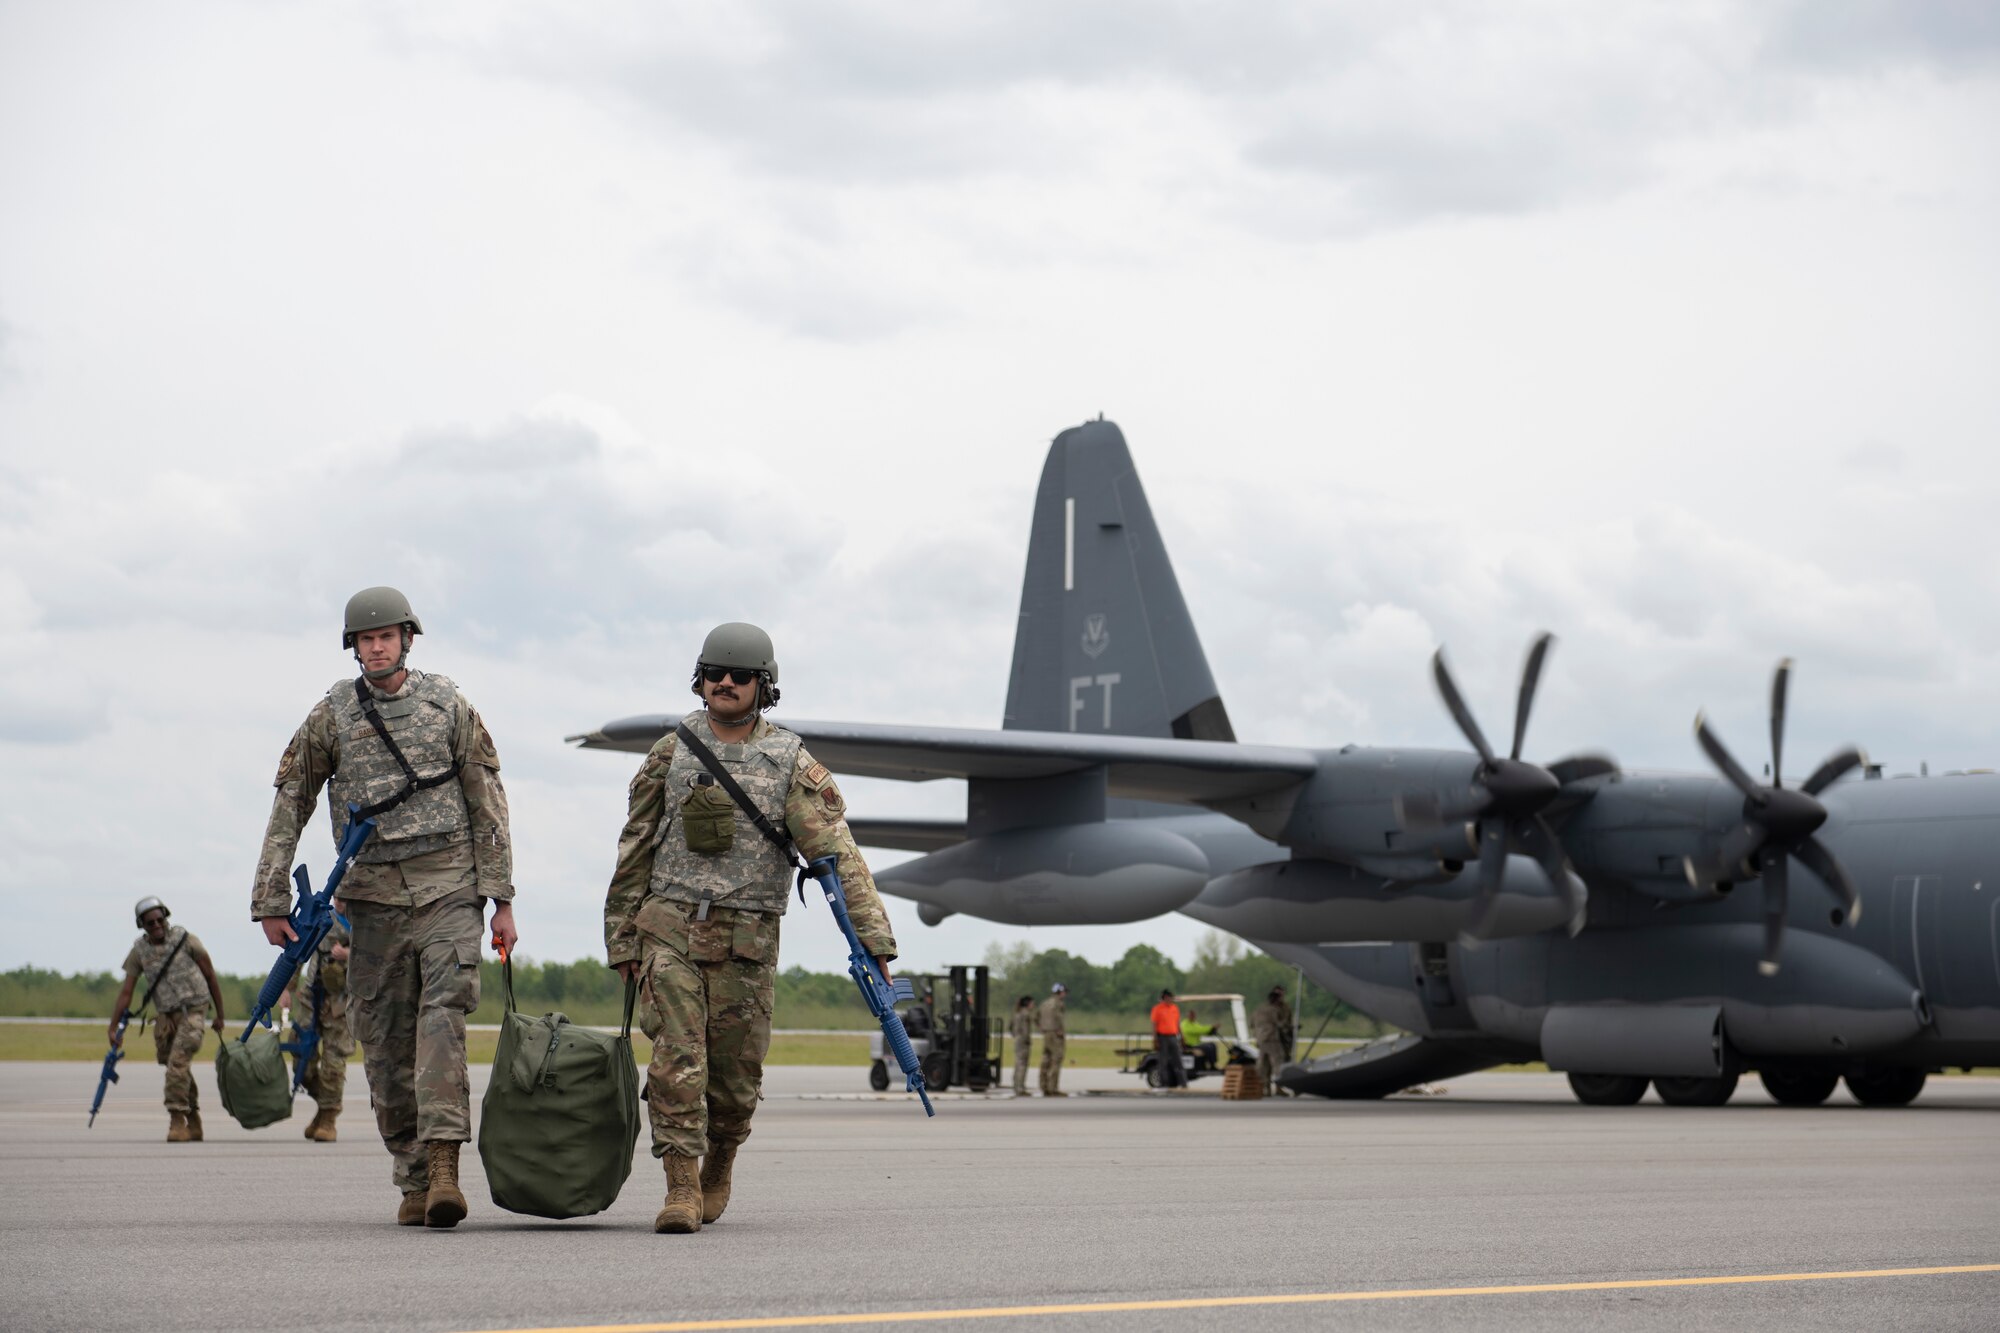 U.S. Air Force Airmen assigned to the 23rd Wing unload an HC-130J Combat King II at Perry-Houston County Airport, Georgia, April 10, 2024. As part of Exercise Ready Tiger 24-1, personnel forward-deployed to a contingency location to conduct hot-pit refueling on A-10C Thunderbolt II aircraft. During Ready Tiger 24-1, the 23rd Wing will be evaluated on the integration of Air Force Force Generation principles such as Agile Combat Employment, integrated combat turns, forward aerial refueling points, multi-capable Airmen, and combat search and rescue capabilities. (U.S. Air Force photo by Senior Airman Rachel Coates)